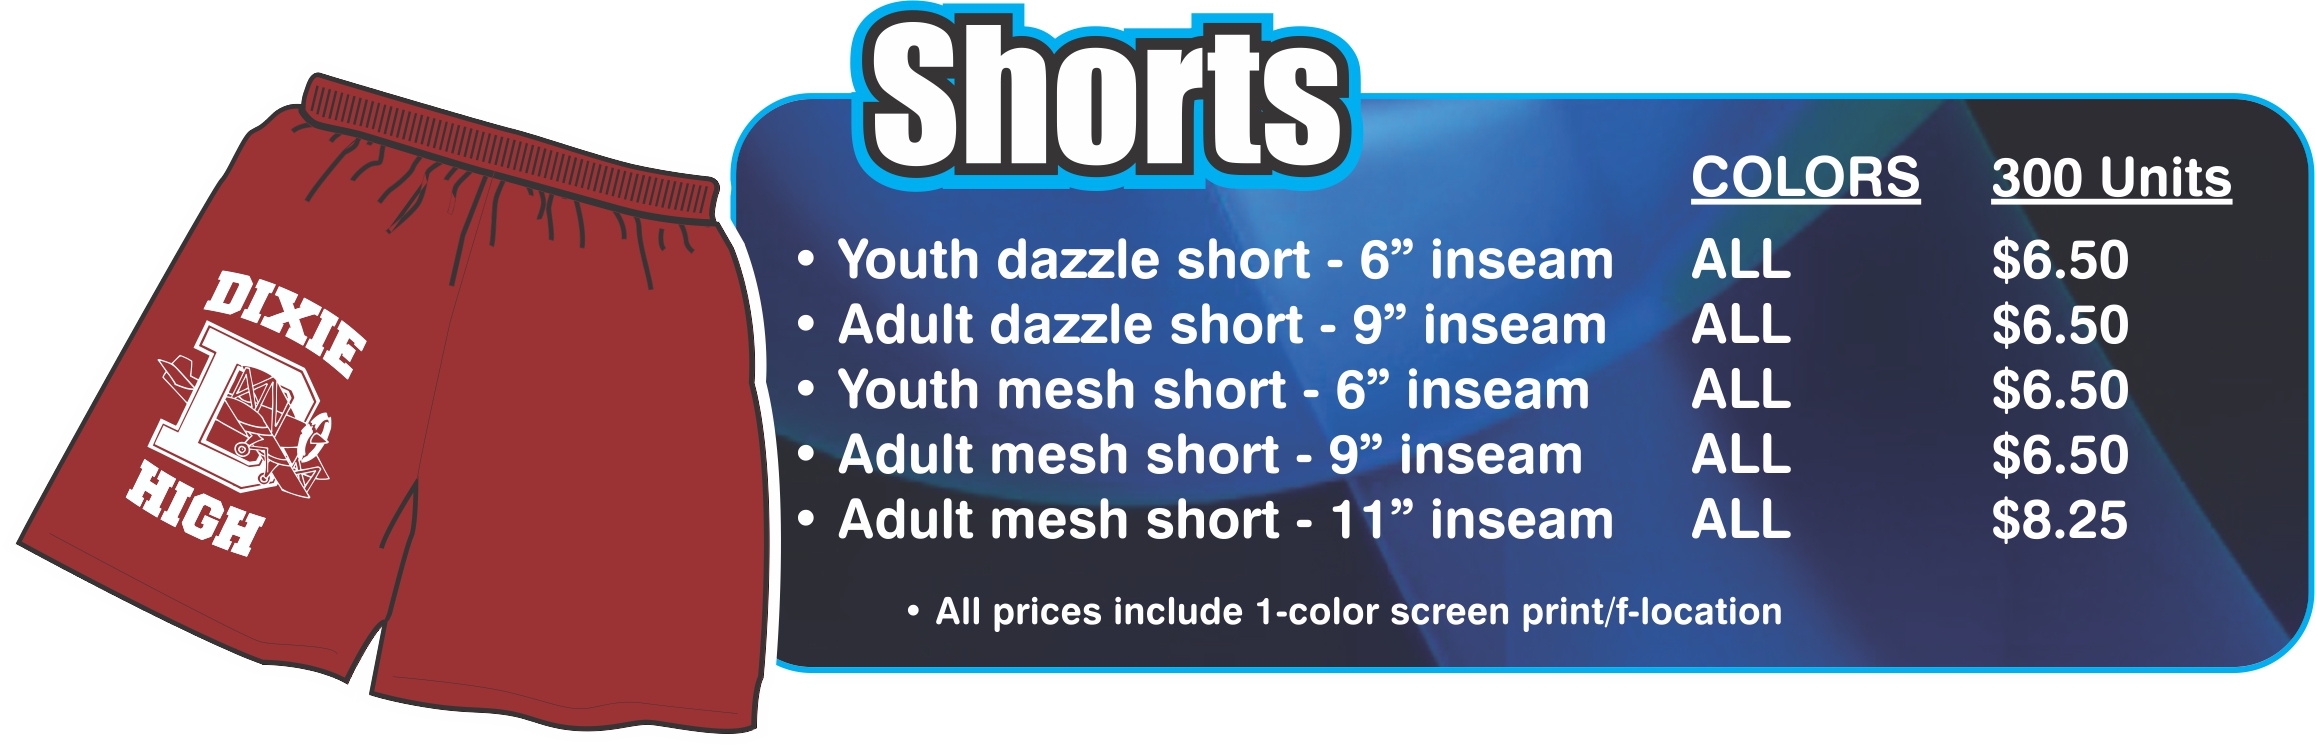 Power Image PE Special Shorts